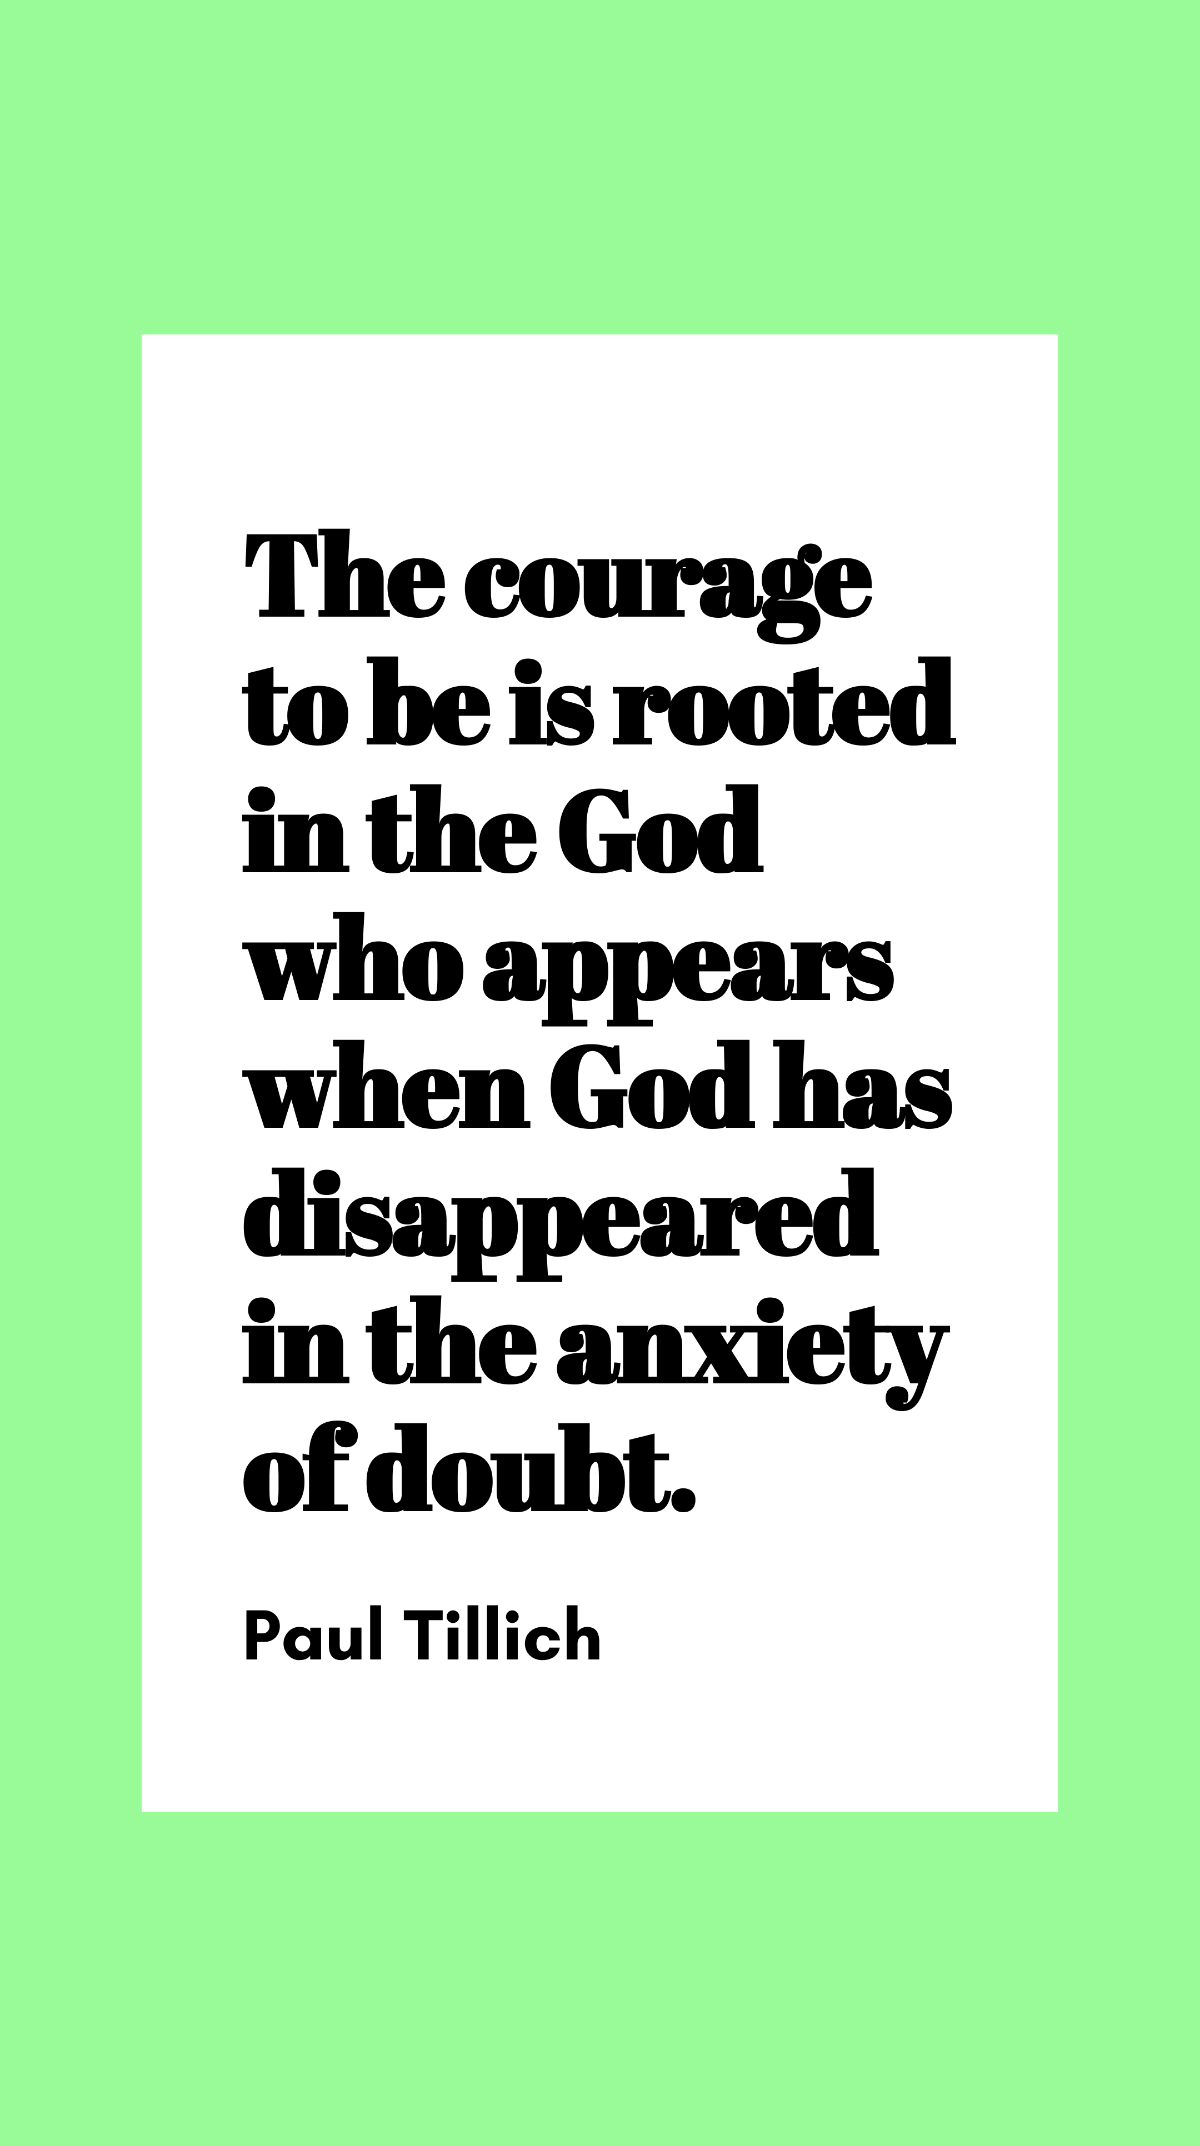 Free Paul Tillich - The courage to be is rooted in the God who appears when God has disappeared in the anxiety of doubt. Template